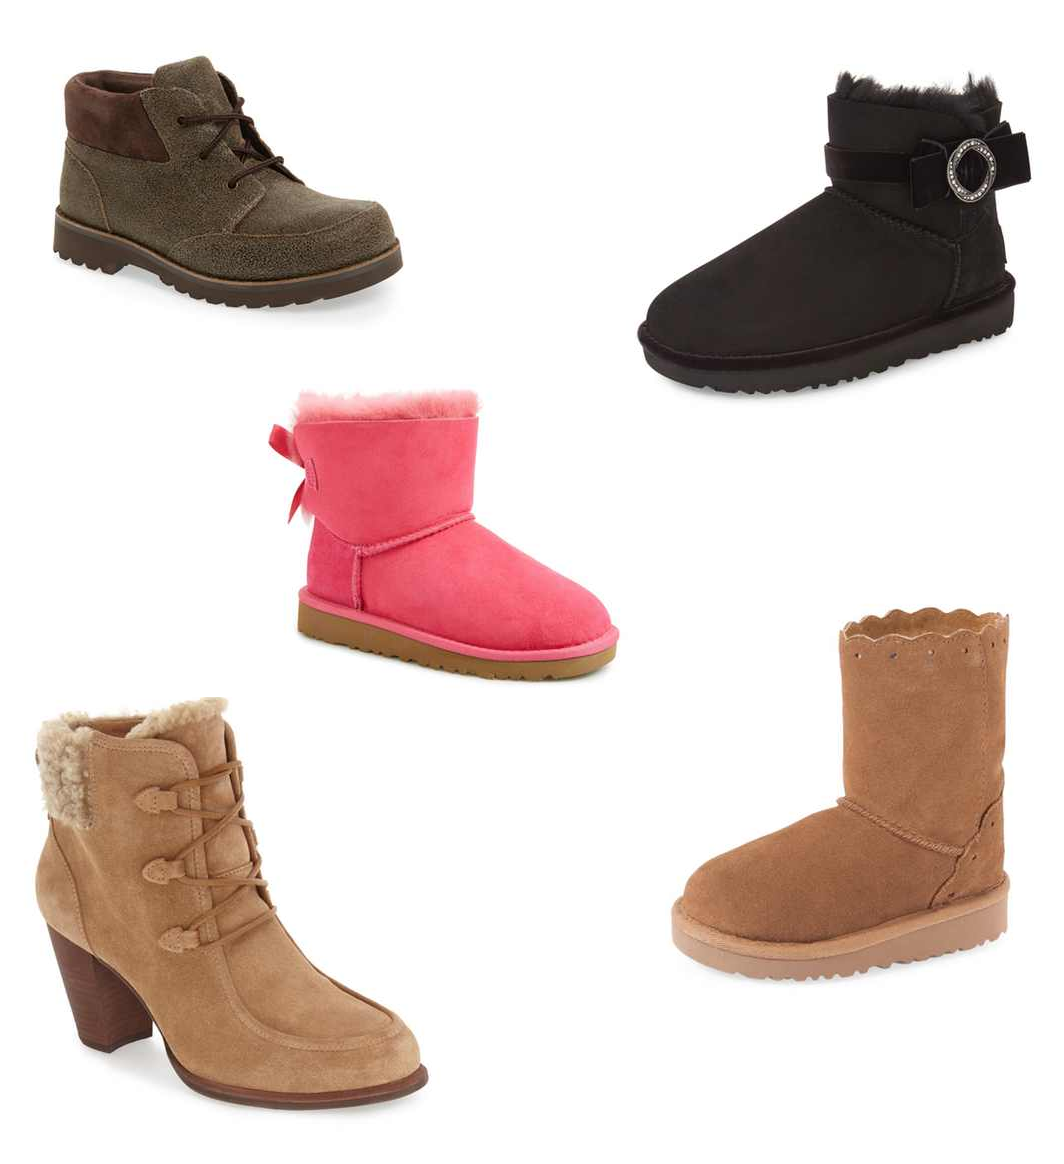 Up to 40% Off UGG Shoes For the Family at Nordstrom + FREE Shipping!